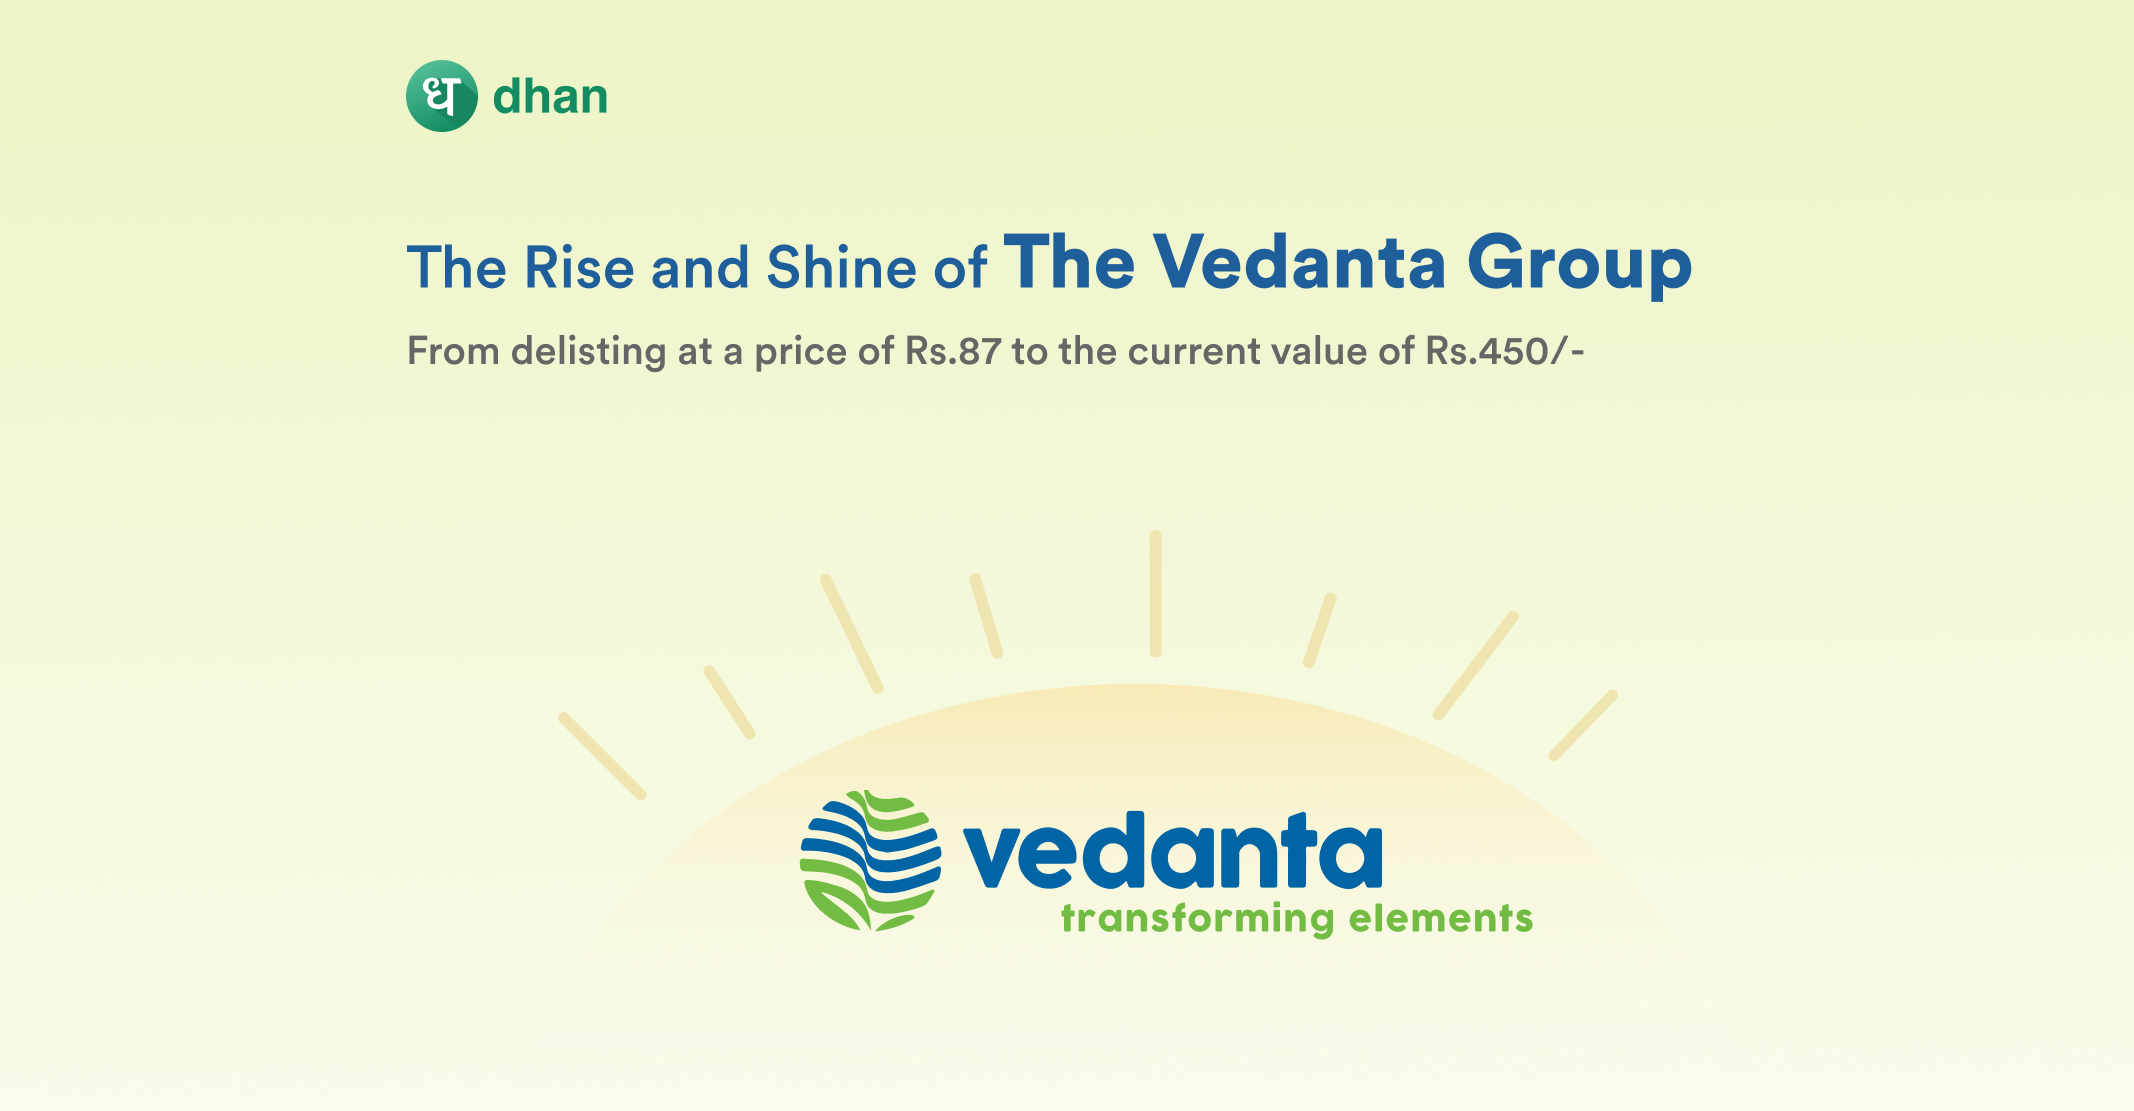 The Rise of Vedanta - Journey from Low to 52W High